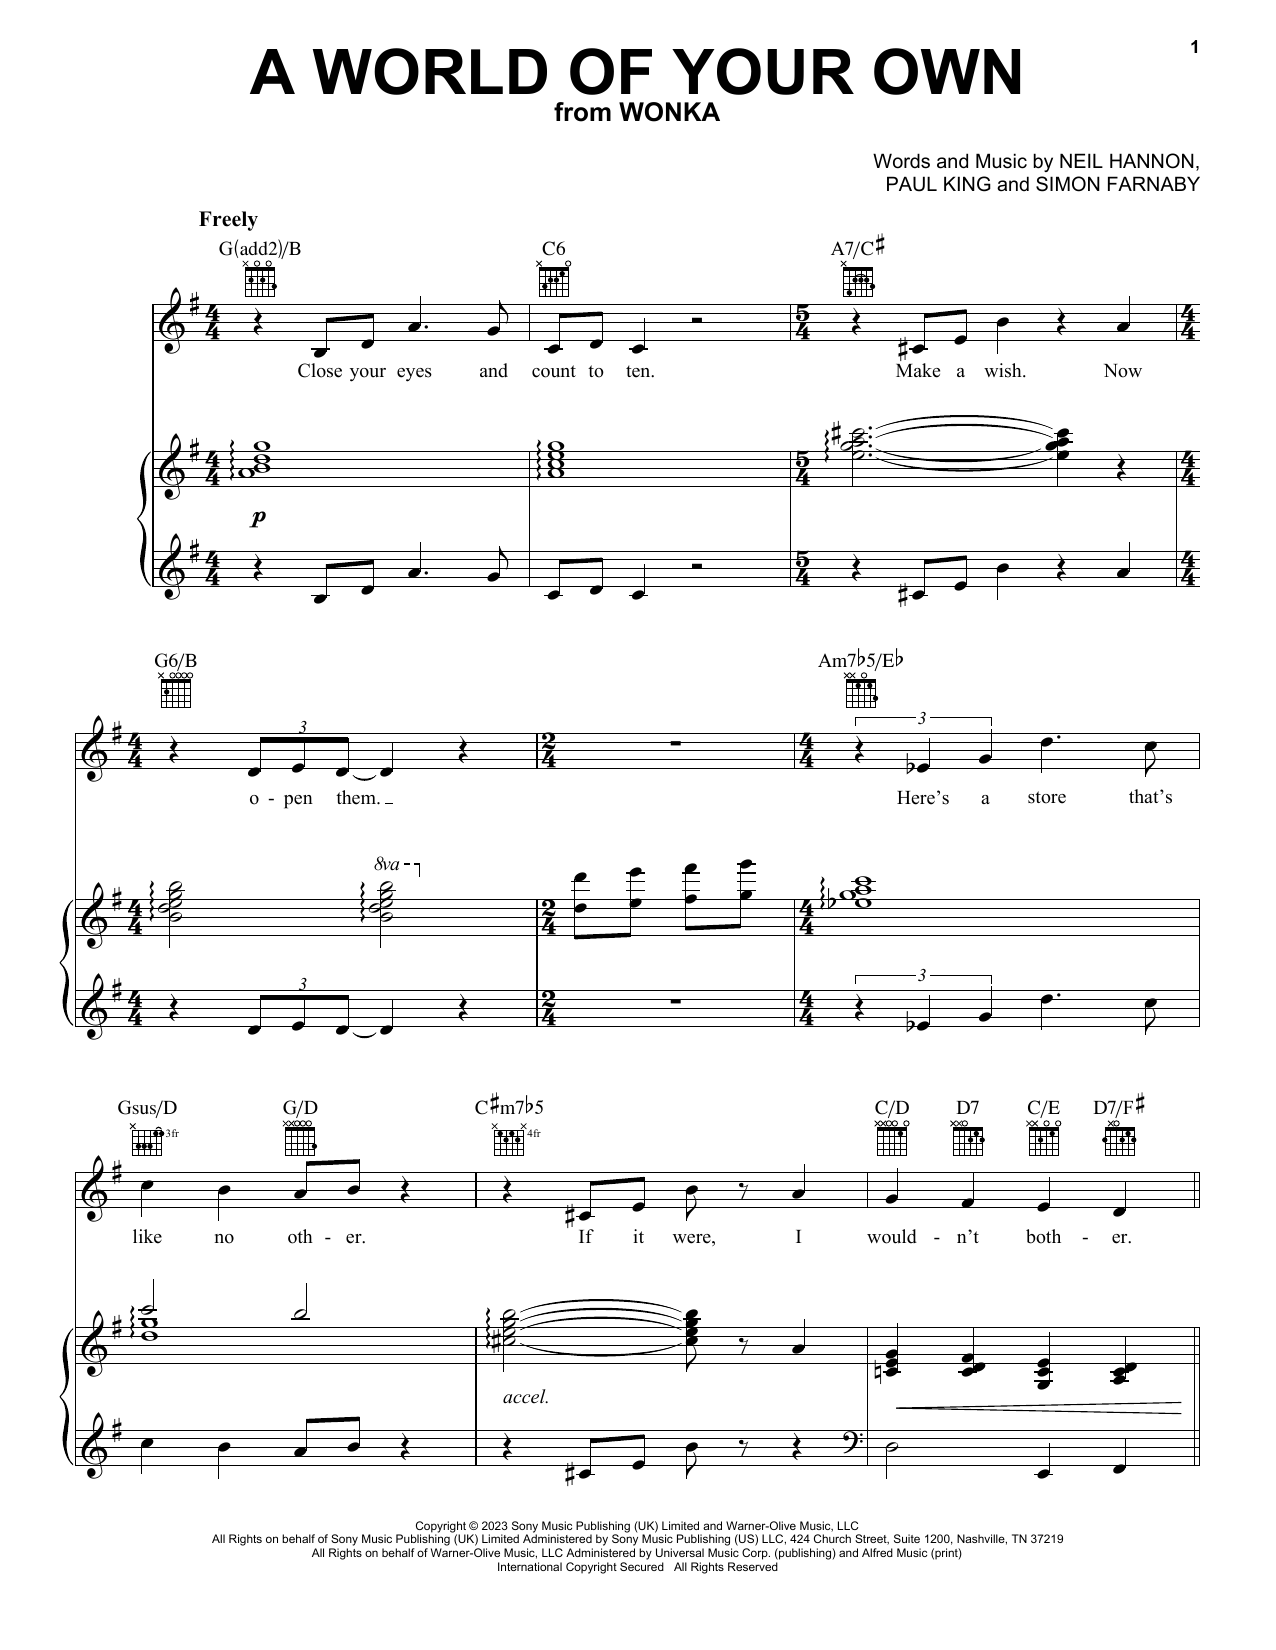 Timothée Chalamet A World Of Your Own (from Wonka) sheet music notes printable PDF score